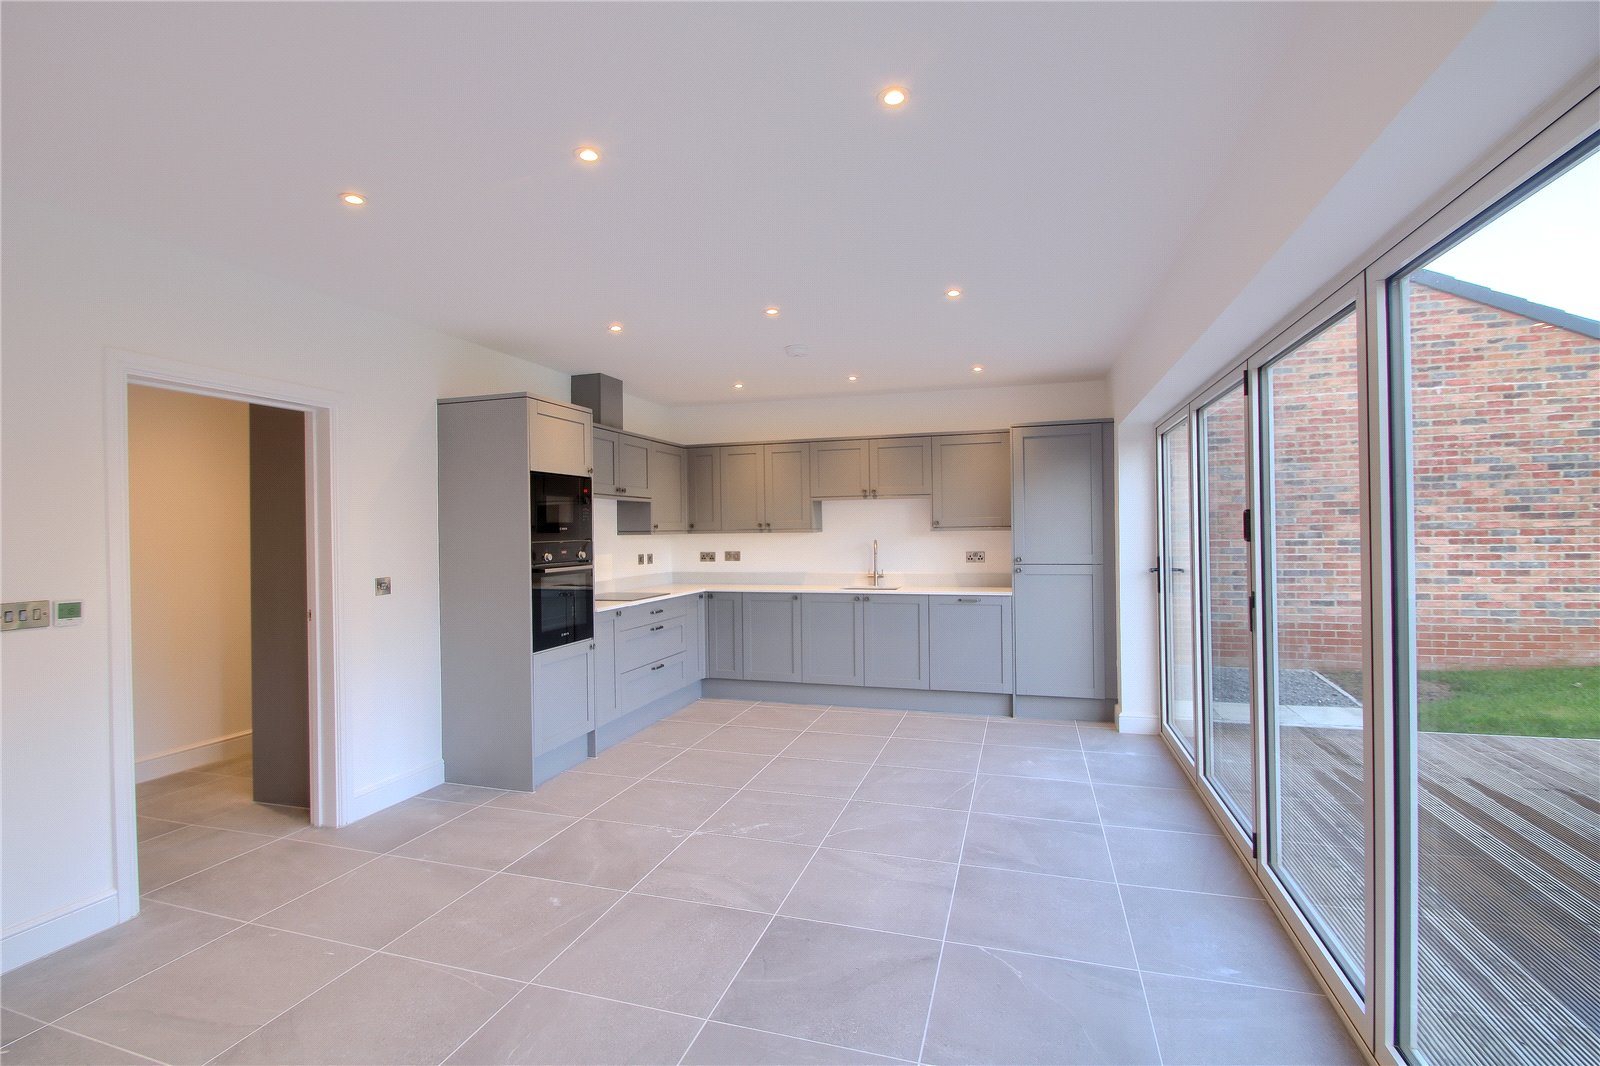 4 bed house for sale in Hunters Way, Eaglescliffe  - Property Image 3